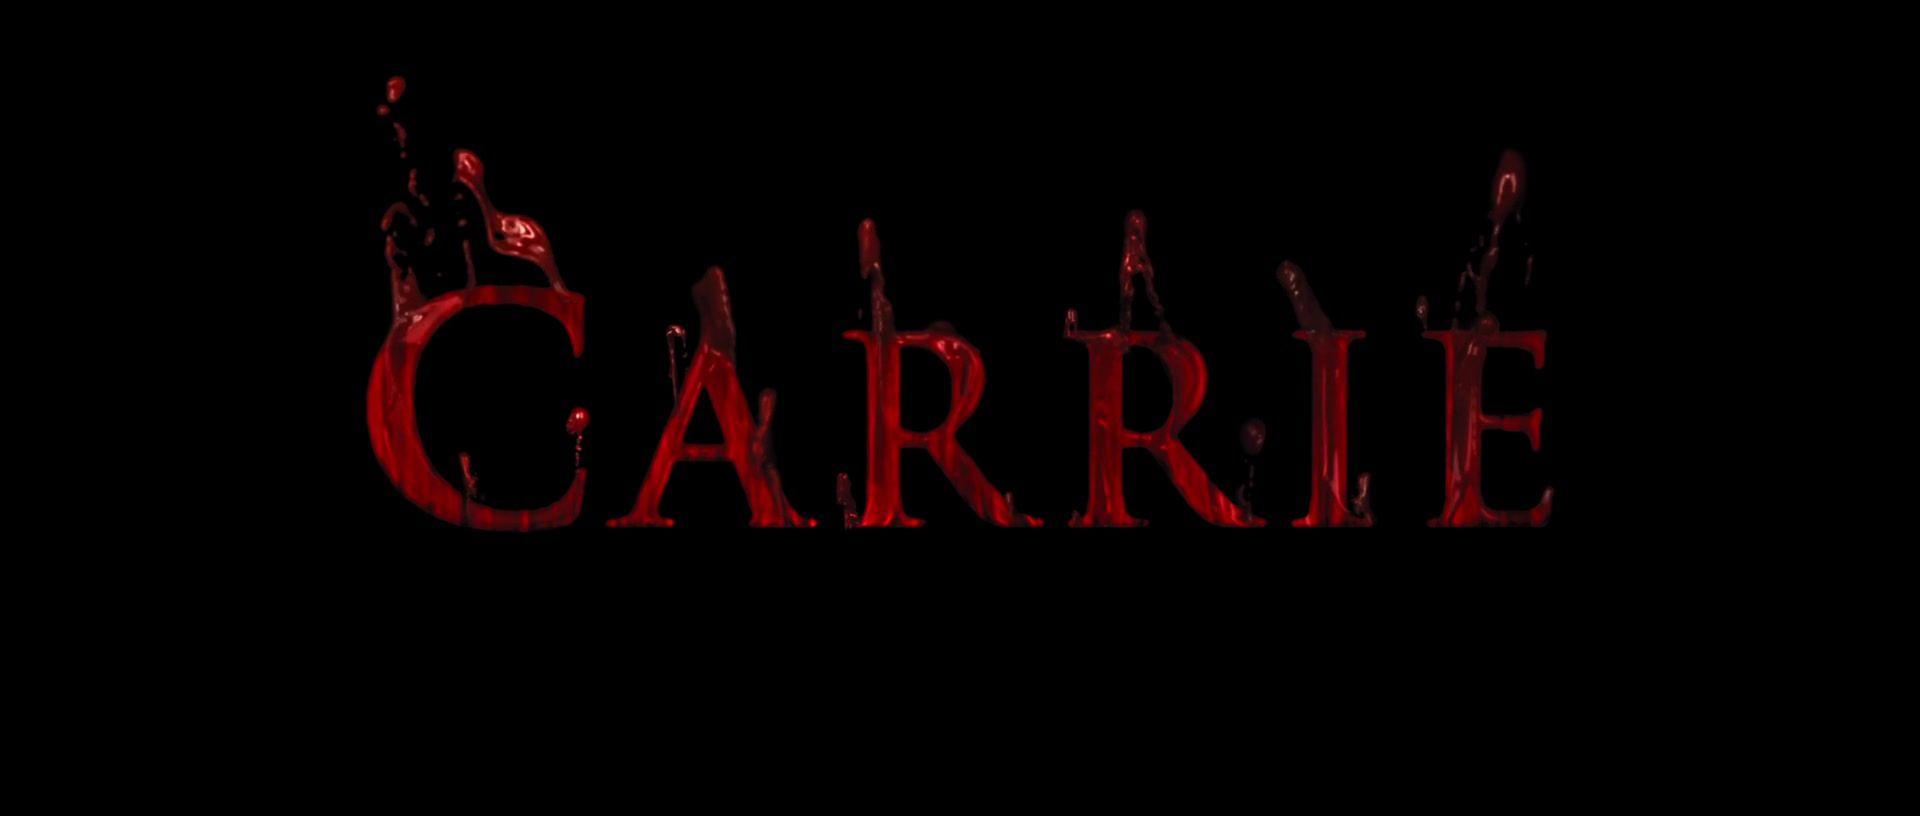 Carrie Logo - Carrie (2013) | Film and Television Wikia | FANDOM powered by Wikia